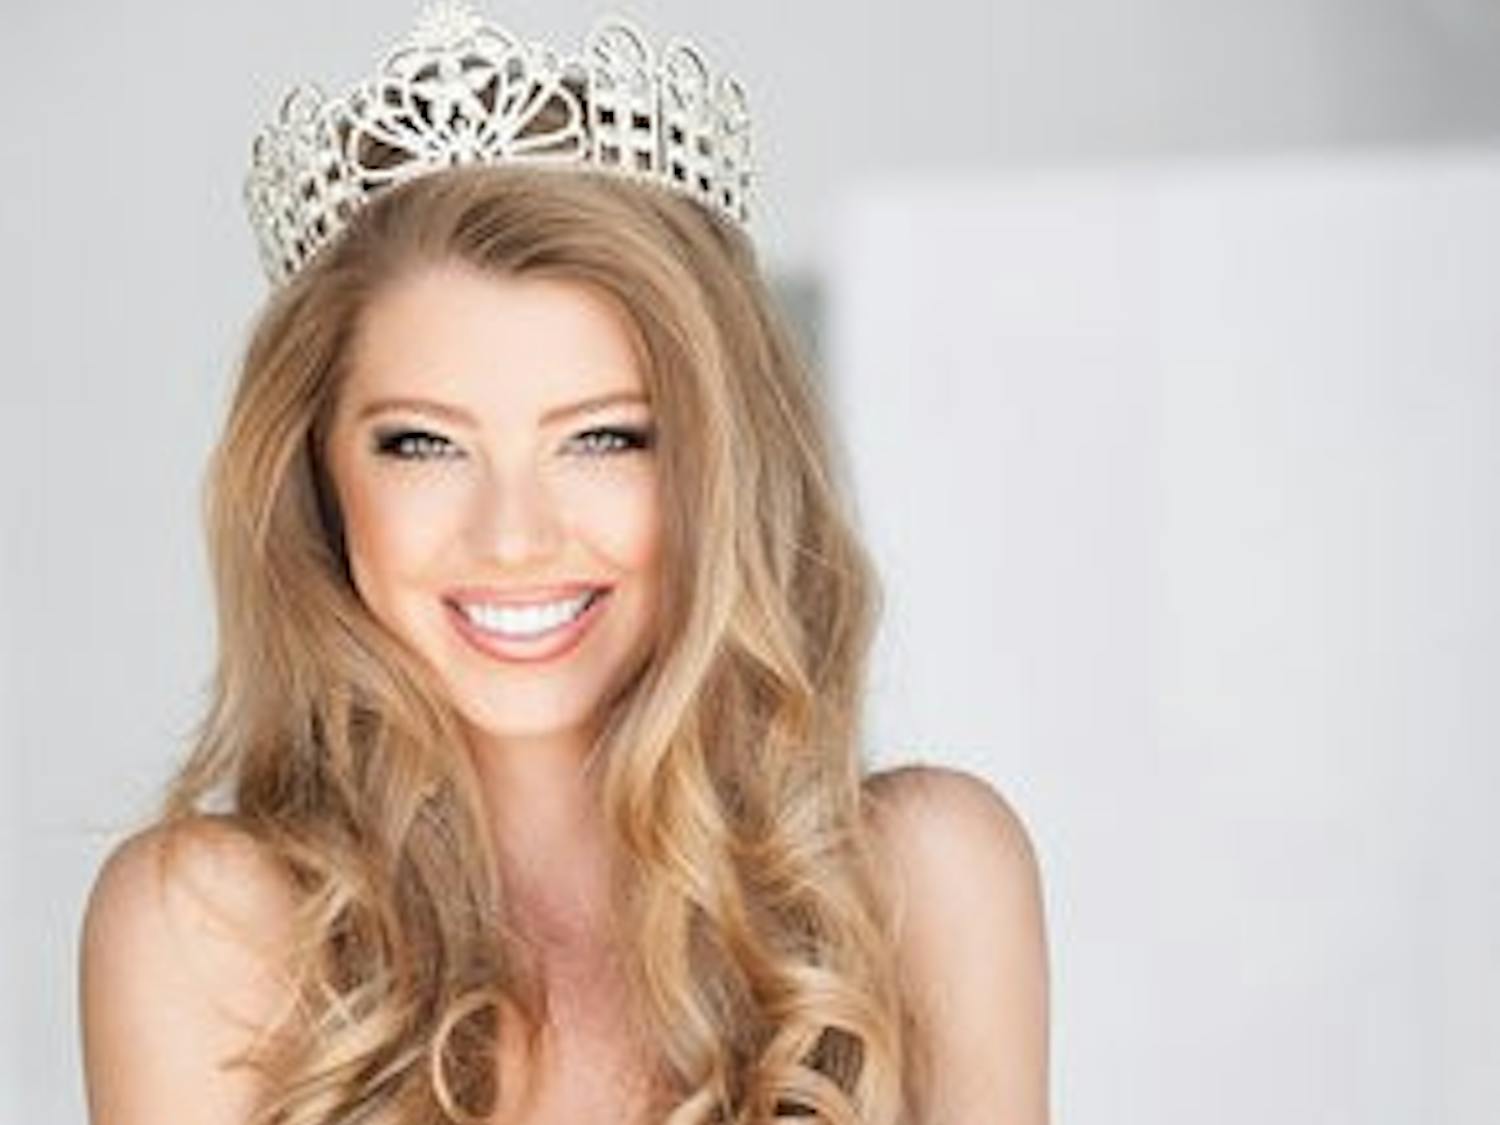 Champion will be competing in Miss Teen USA on Aug. 1